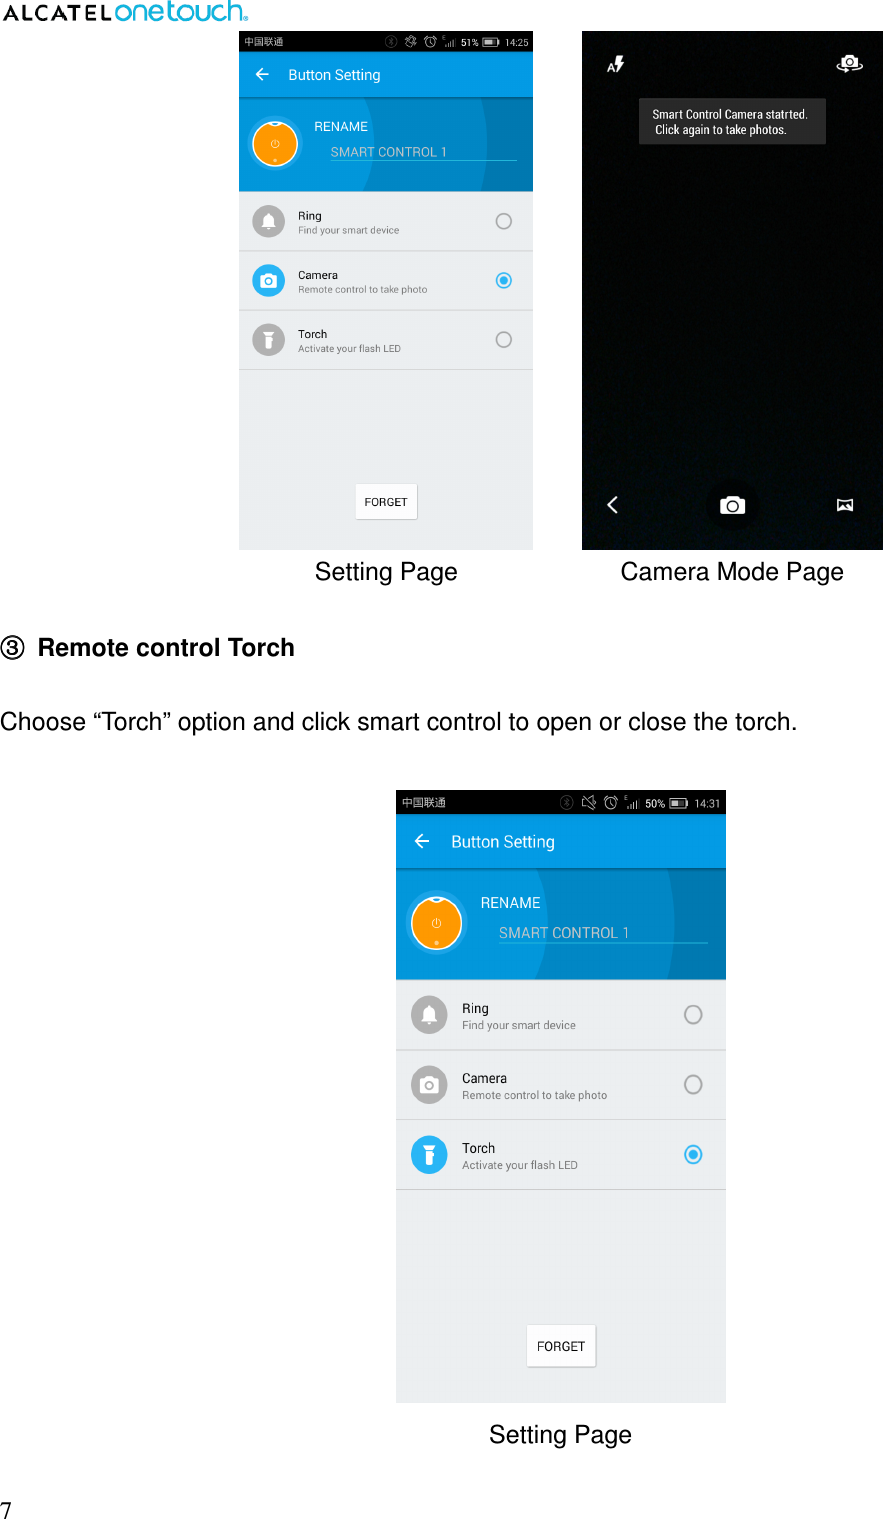  7              Setting Page                          Camera Mode Page  ③③③③  Remote control Torch  Choose “Torch” option and click smart control to open or close the torch.   Setting Page  